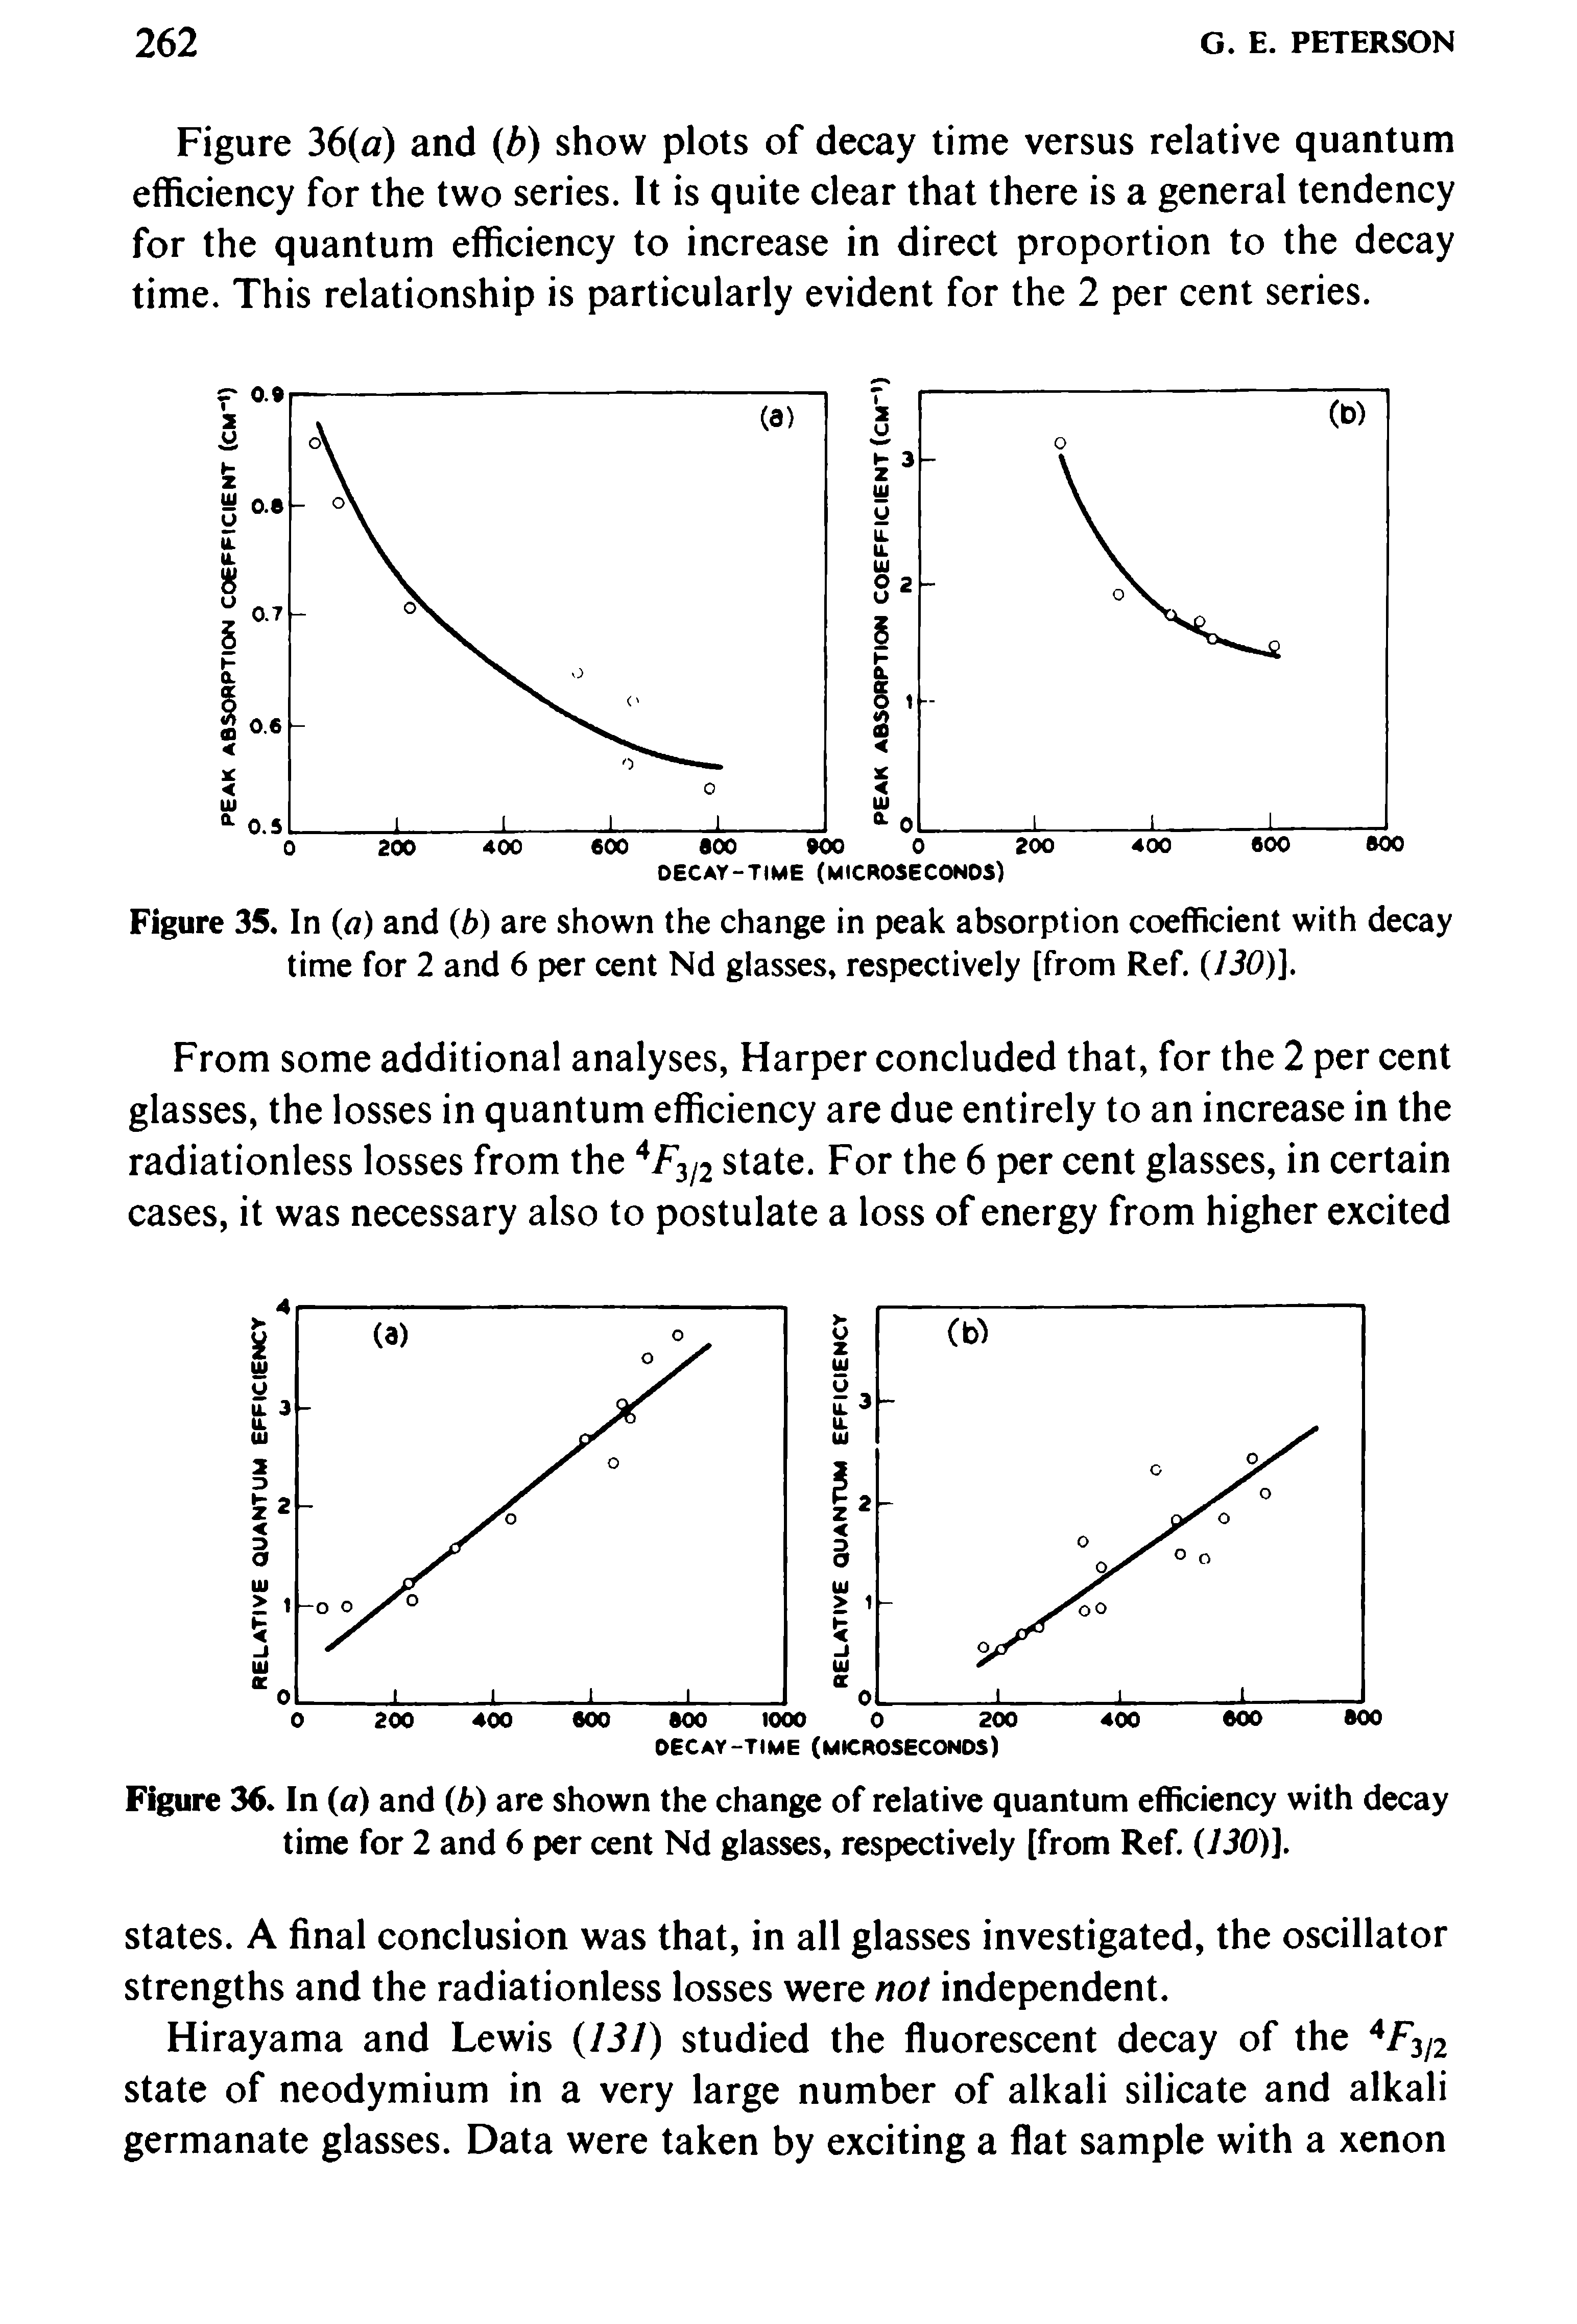 Figure 35. In (a) and (b) are shown the change in peak absorption coefficient with decay time for 2 and 6 per cent Nd glasses, respectively [from Ref. (130)],...